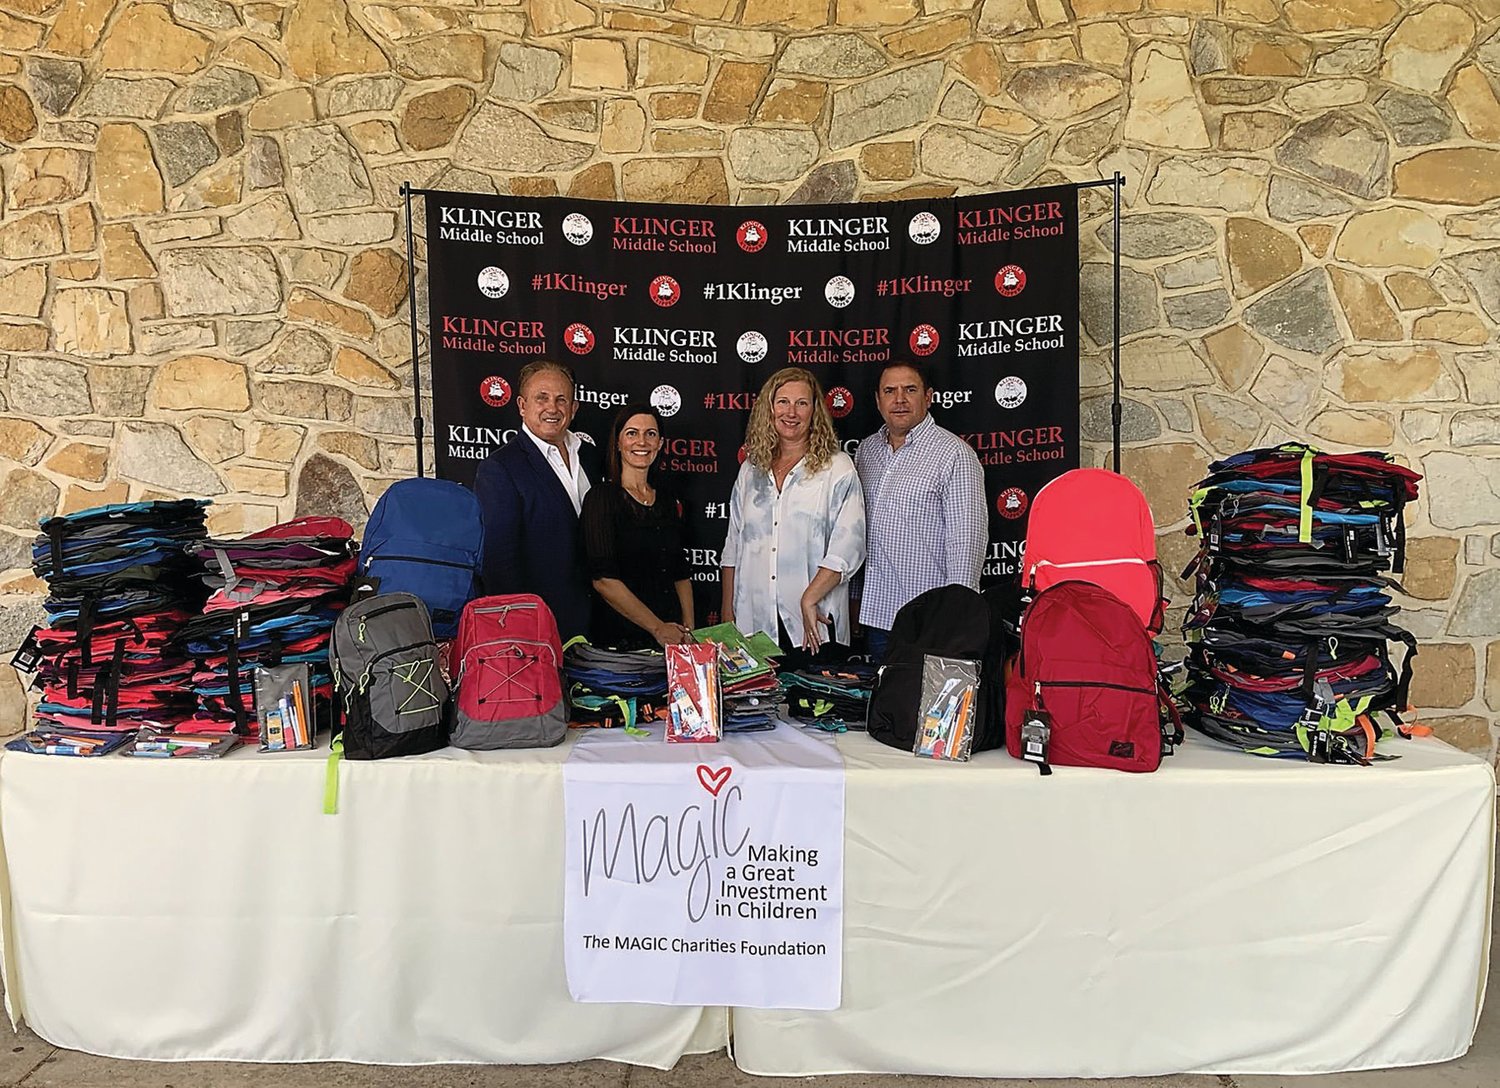 Steve and Sharon Grosso, co-founders of the MAGIC Charities Foundation, Kathy Guzman, marketing consultant for Benchmark Lending, and Glenn M. Davis, branch manager of Benchmark Lending, stand with donated backpacks and school supplies at Klinger Middle School in Southampton.